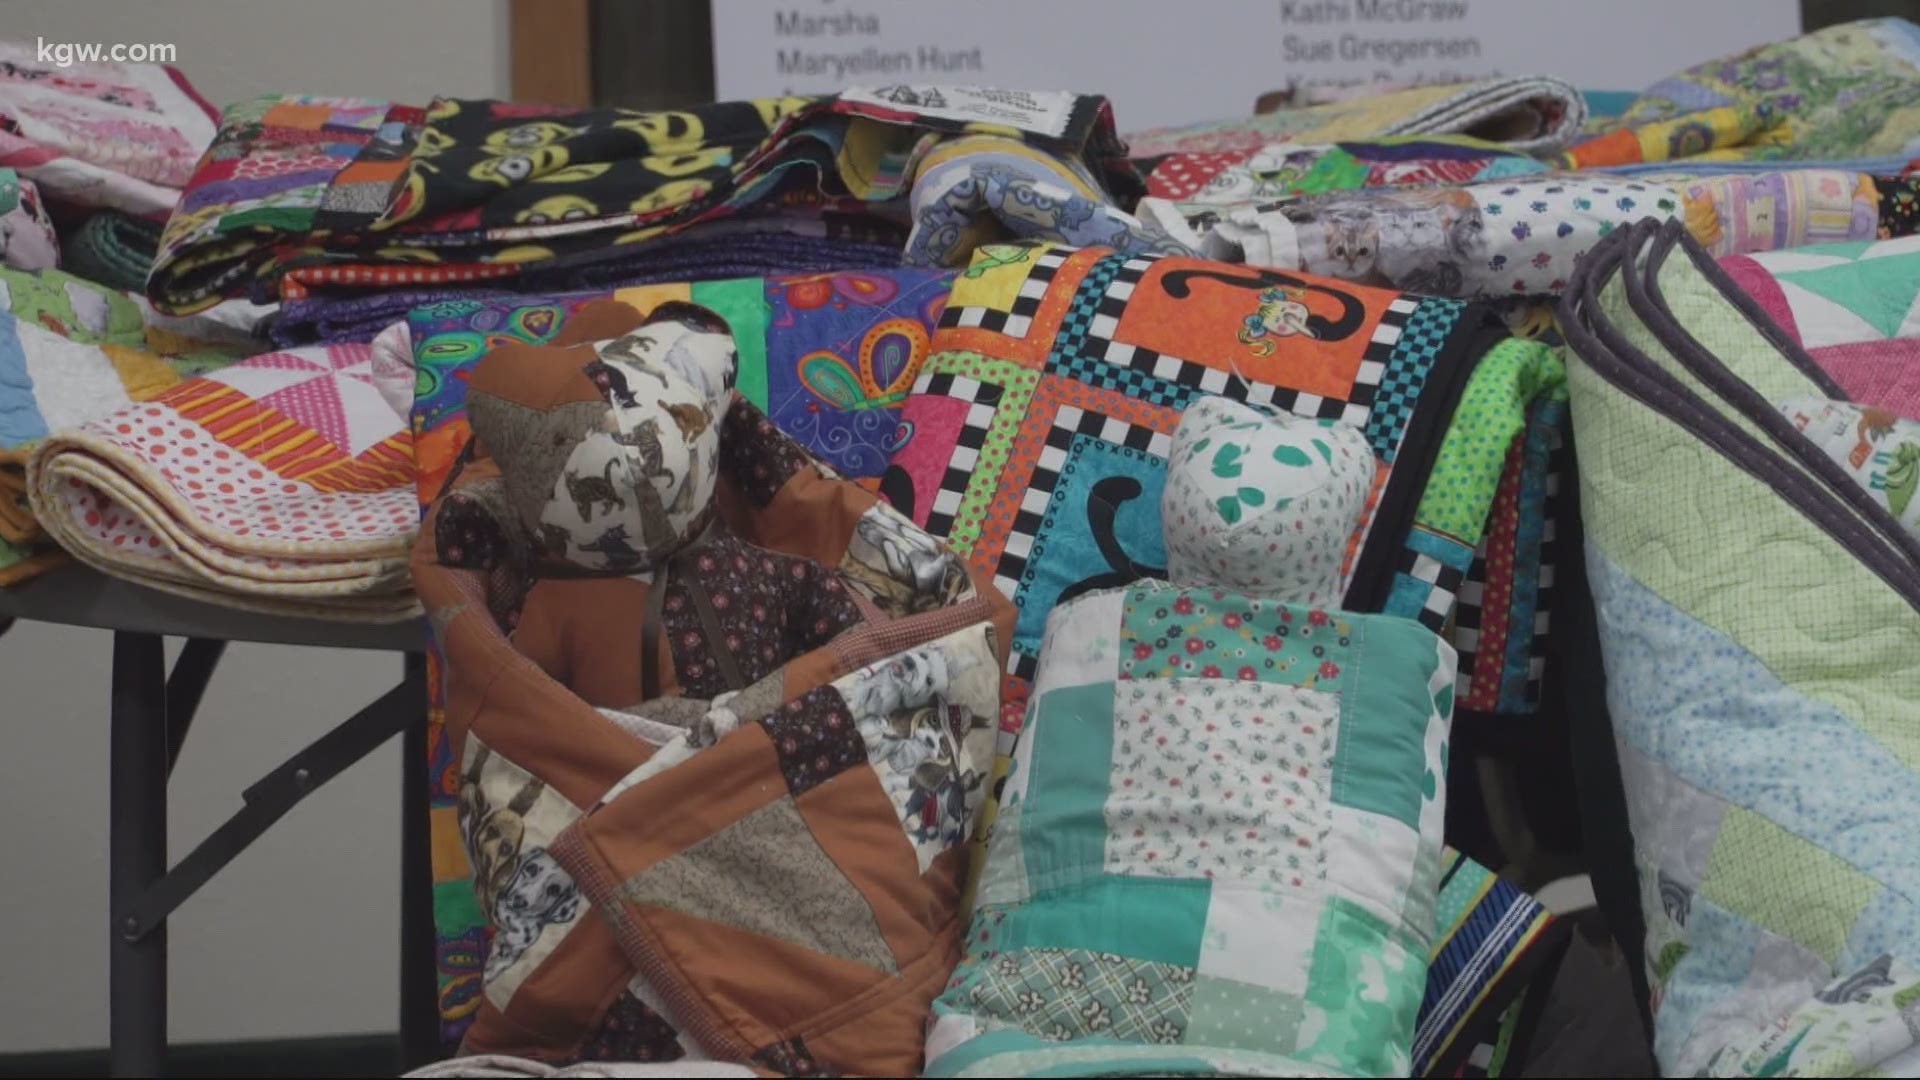 More than 2,000 quilts were donated from people in 42 states to help people in Gates recover from the wildfires that ravaged parts of Oregon earlier this year.